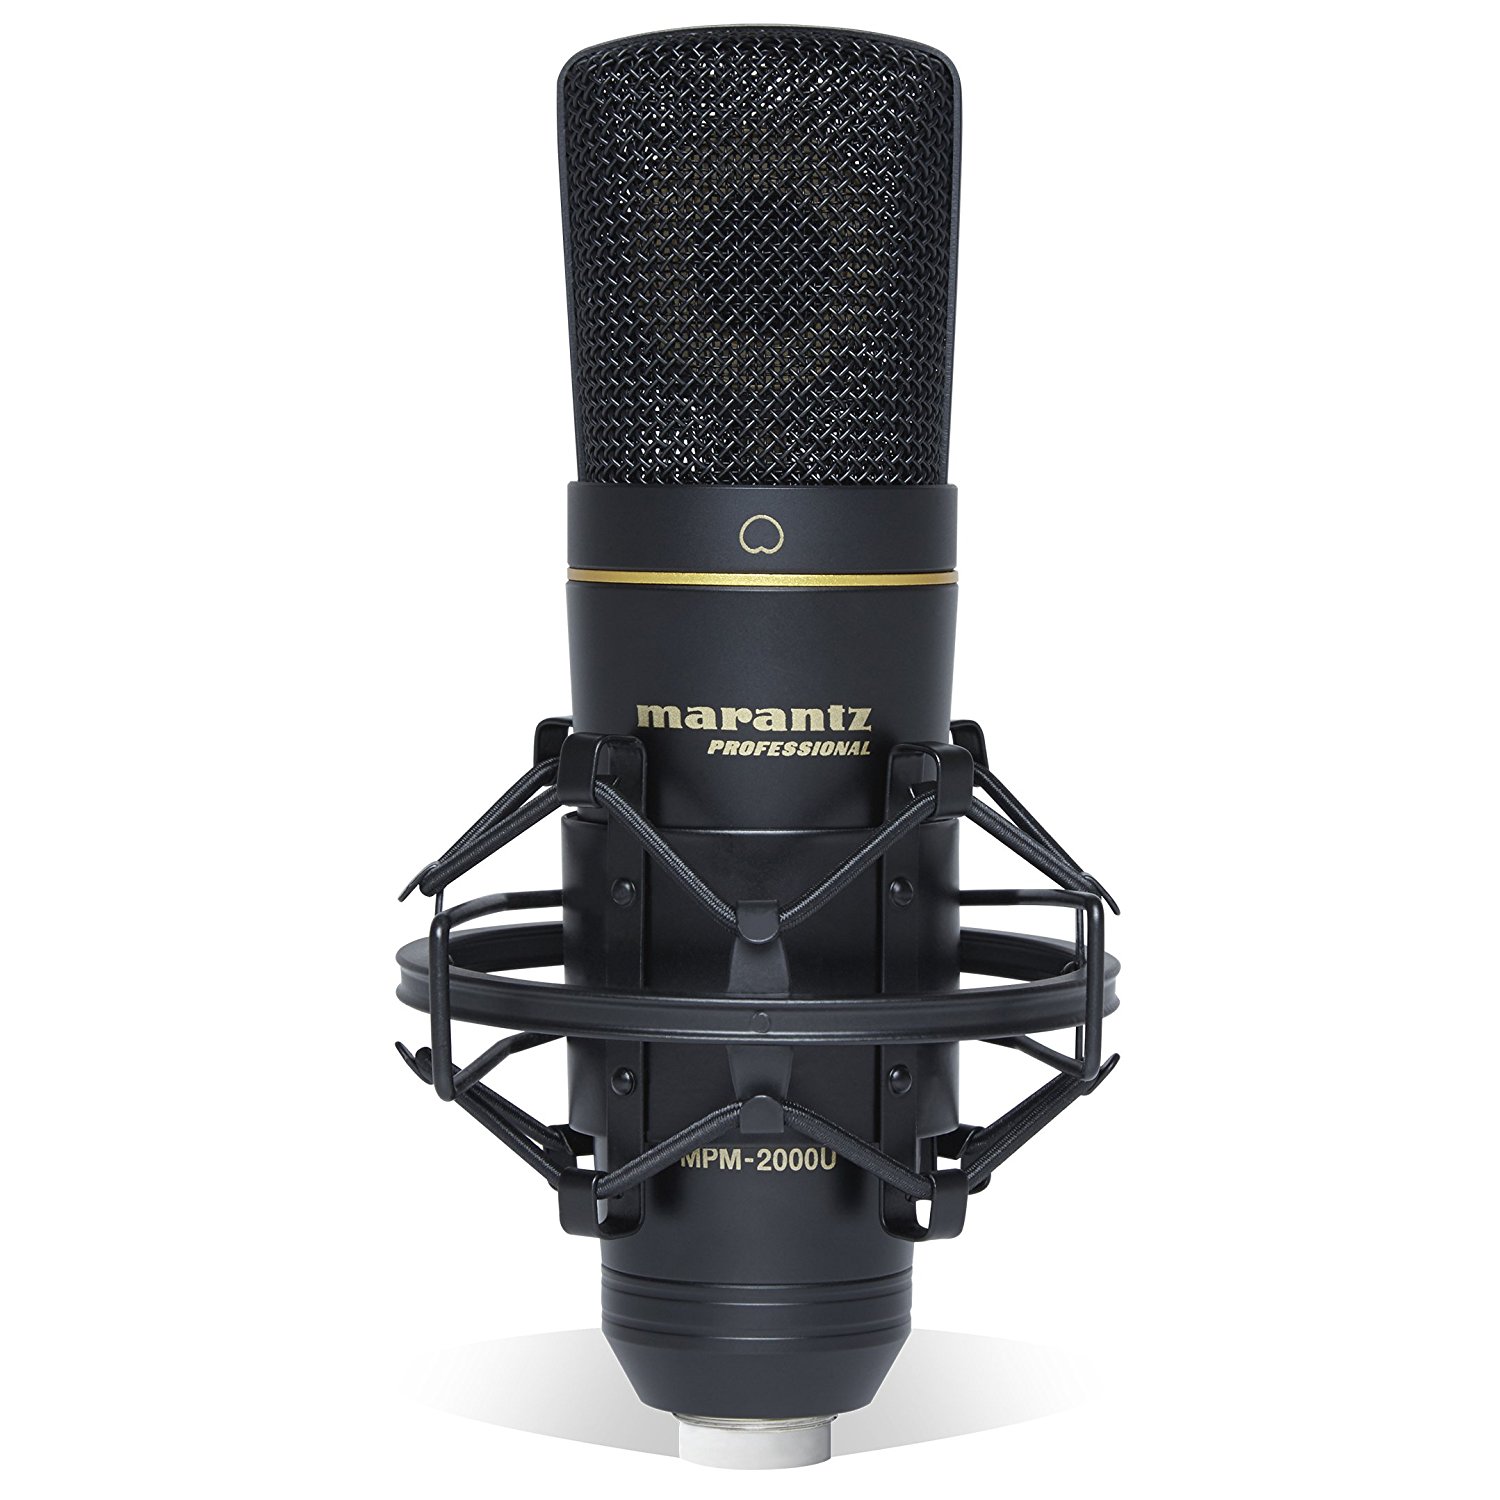 Marantz Professional MPM-2000U | Studio Condenser USB Microphone with Shock Mount, USB Cable & Carry Case (USB Out)